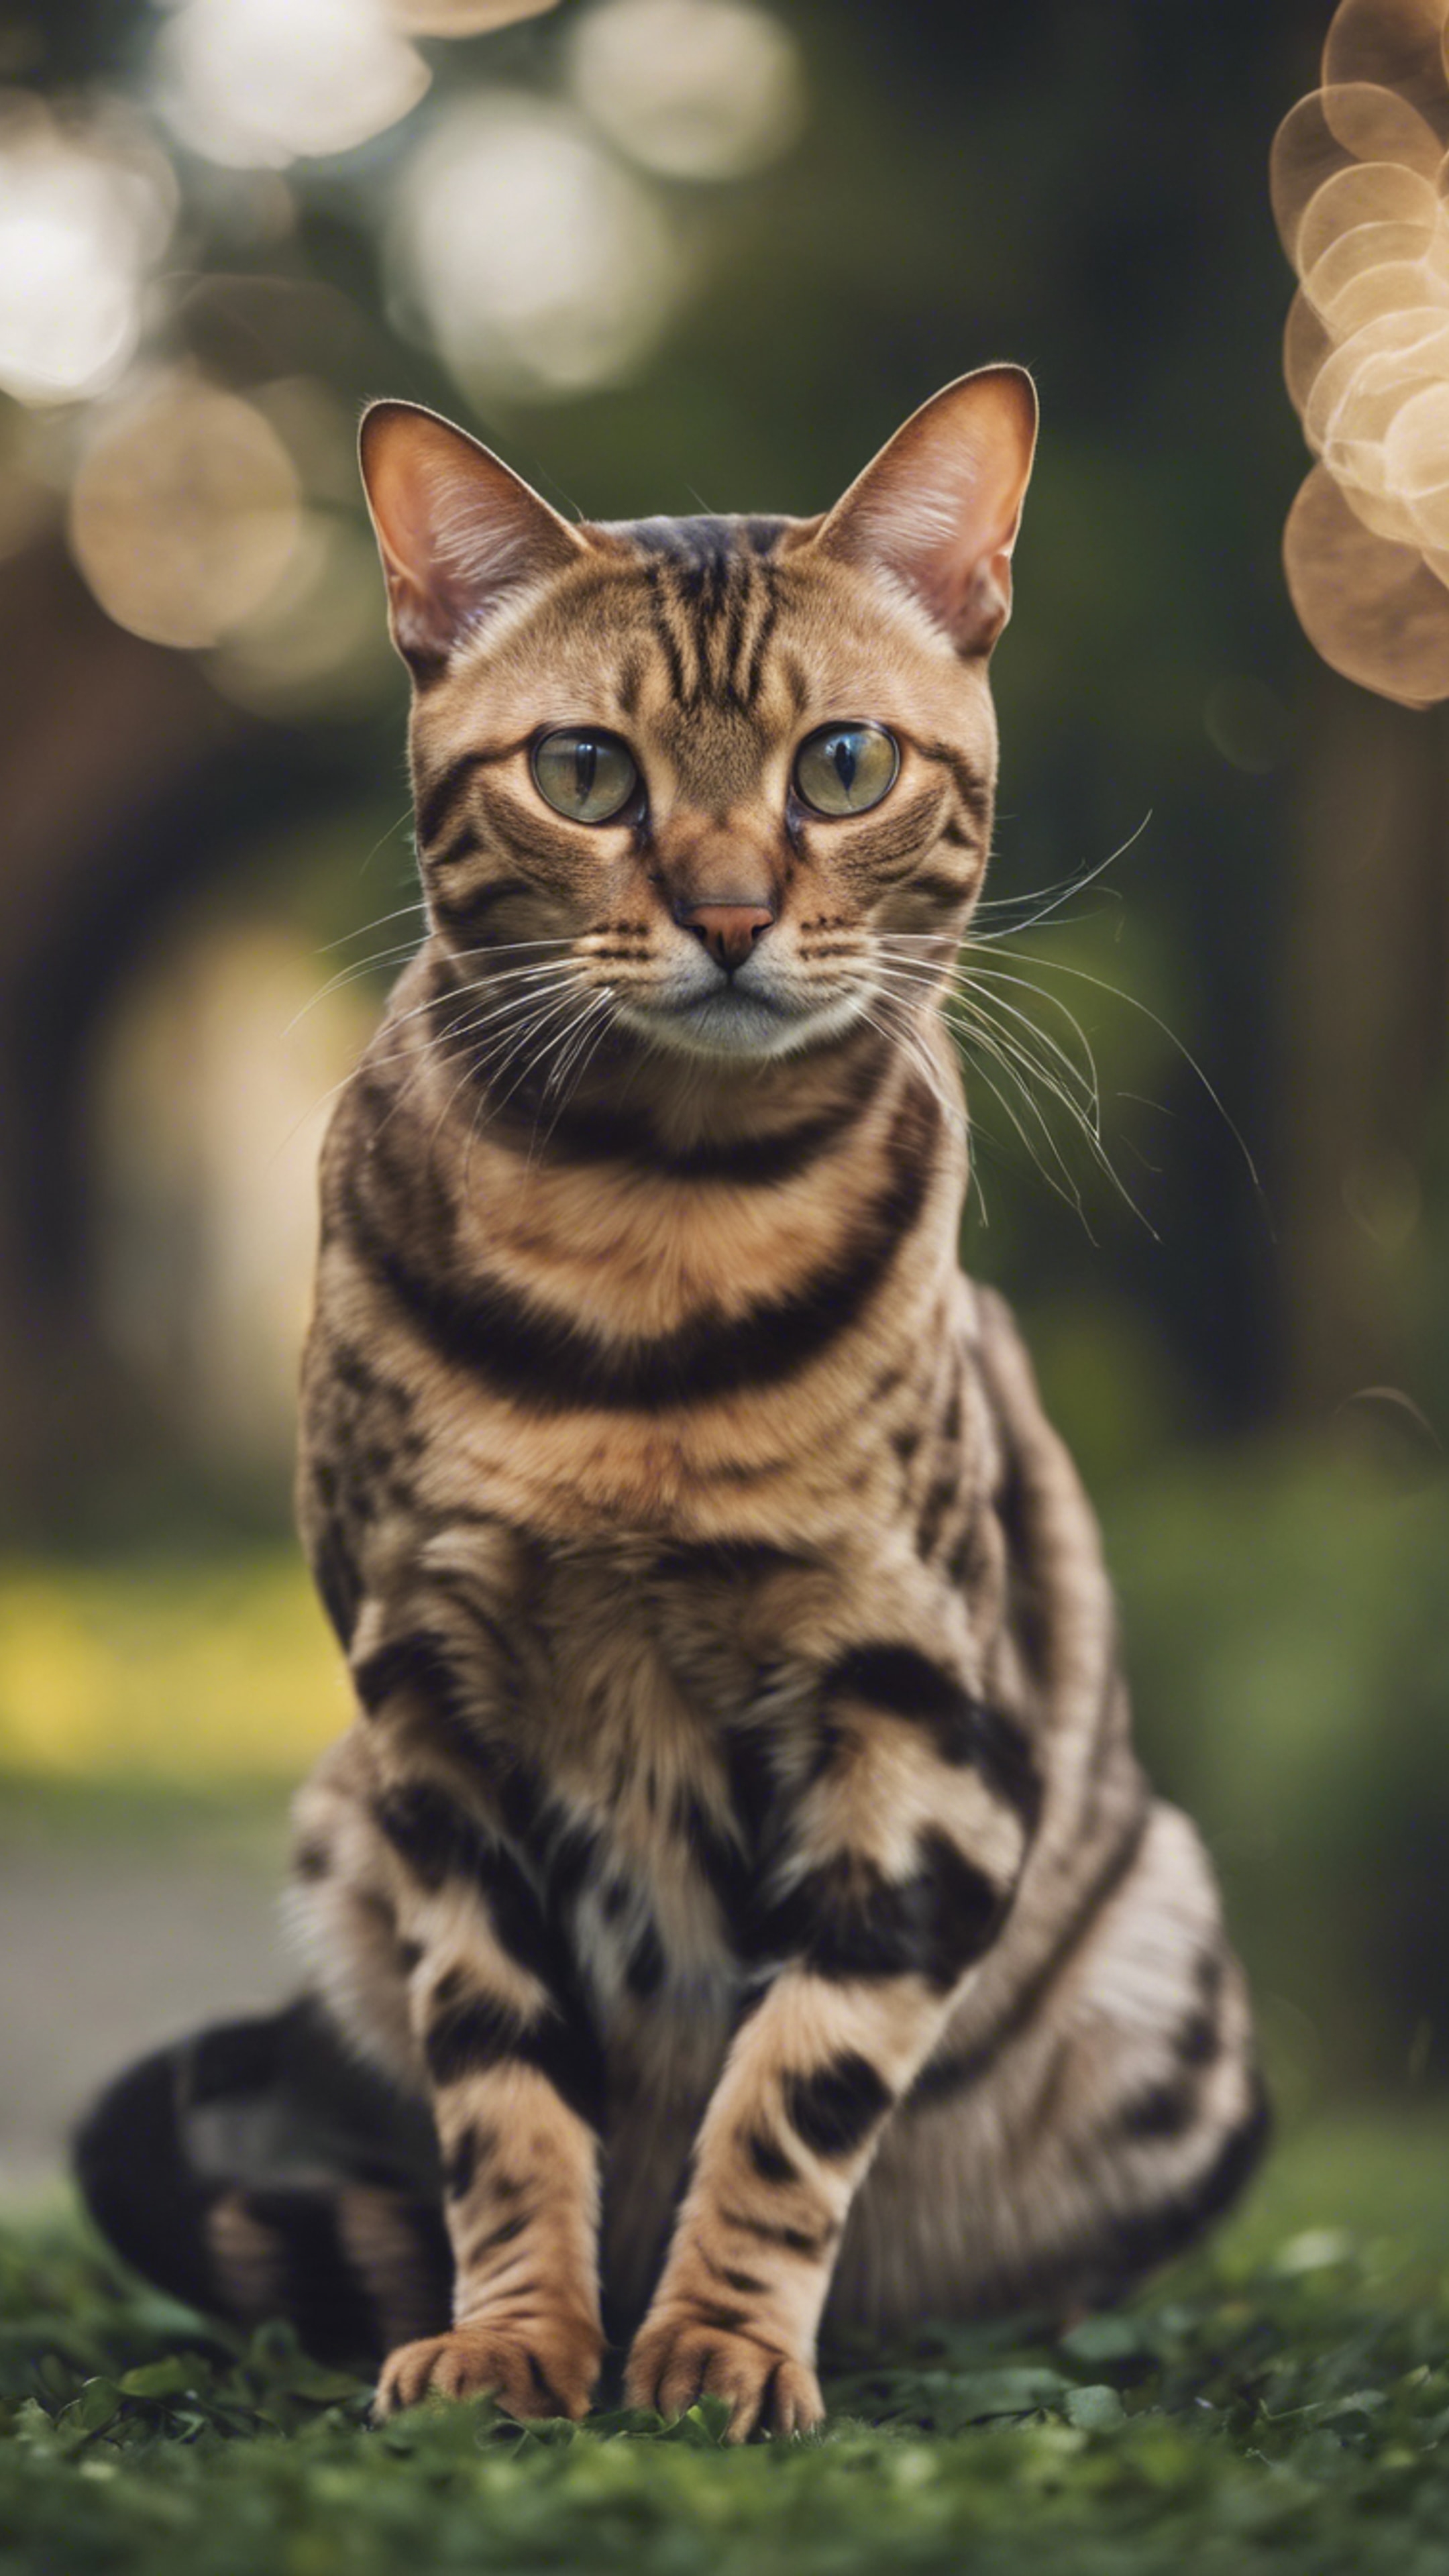 A sleek, aristocratic Bengal cat royally ignoring a mouse scampering by. کاغذ دیواری[9f7ab84a7c6b485a8696]